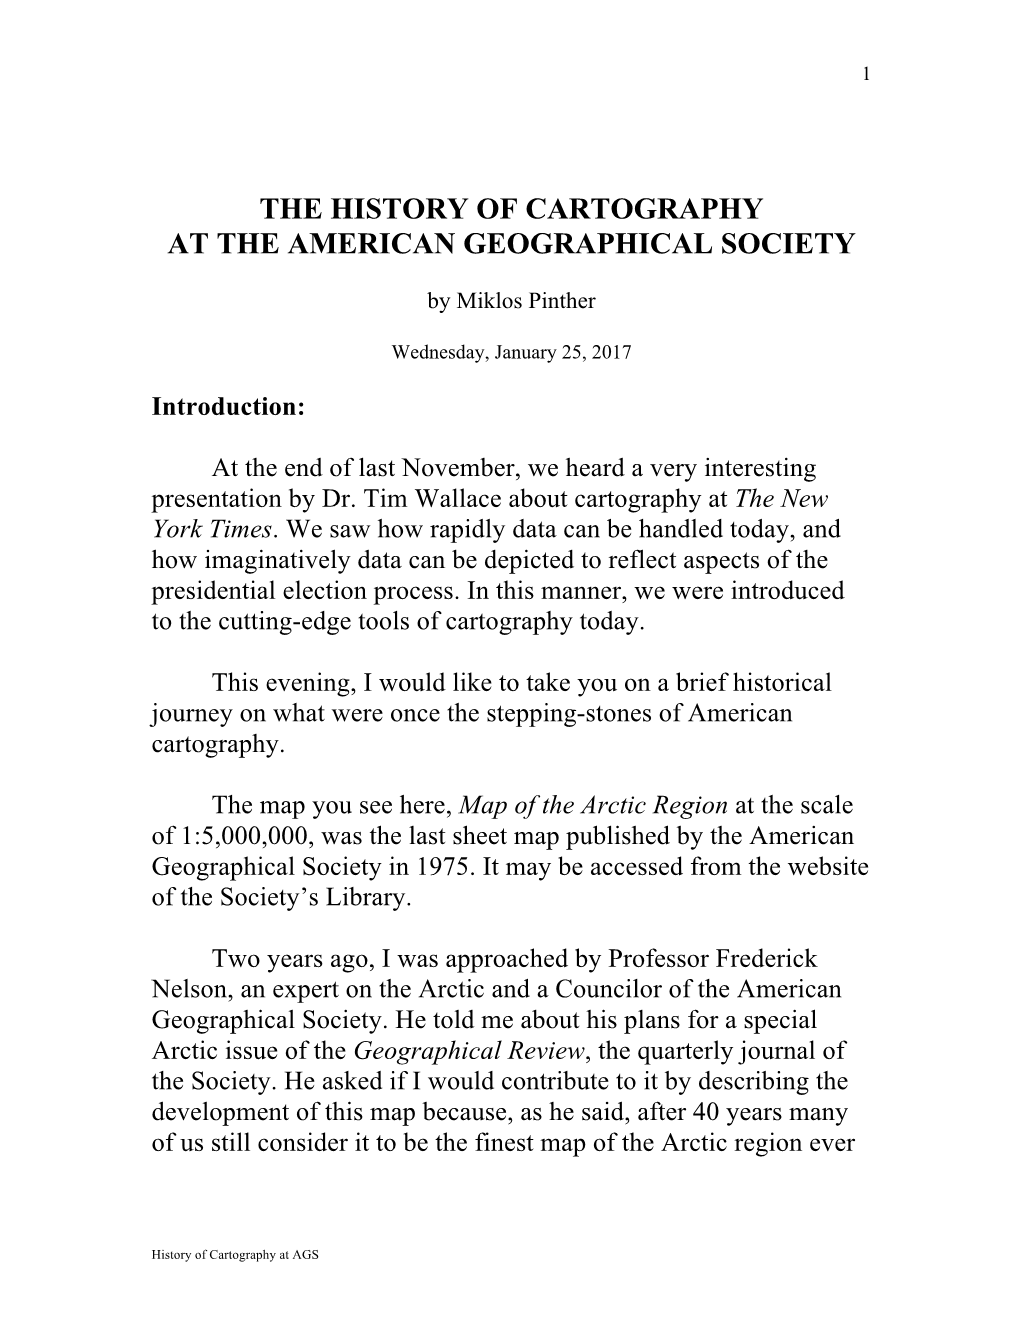 The History of Cartography at the American Geographical Society